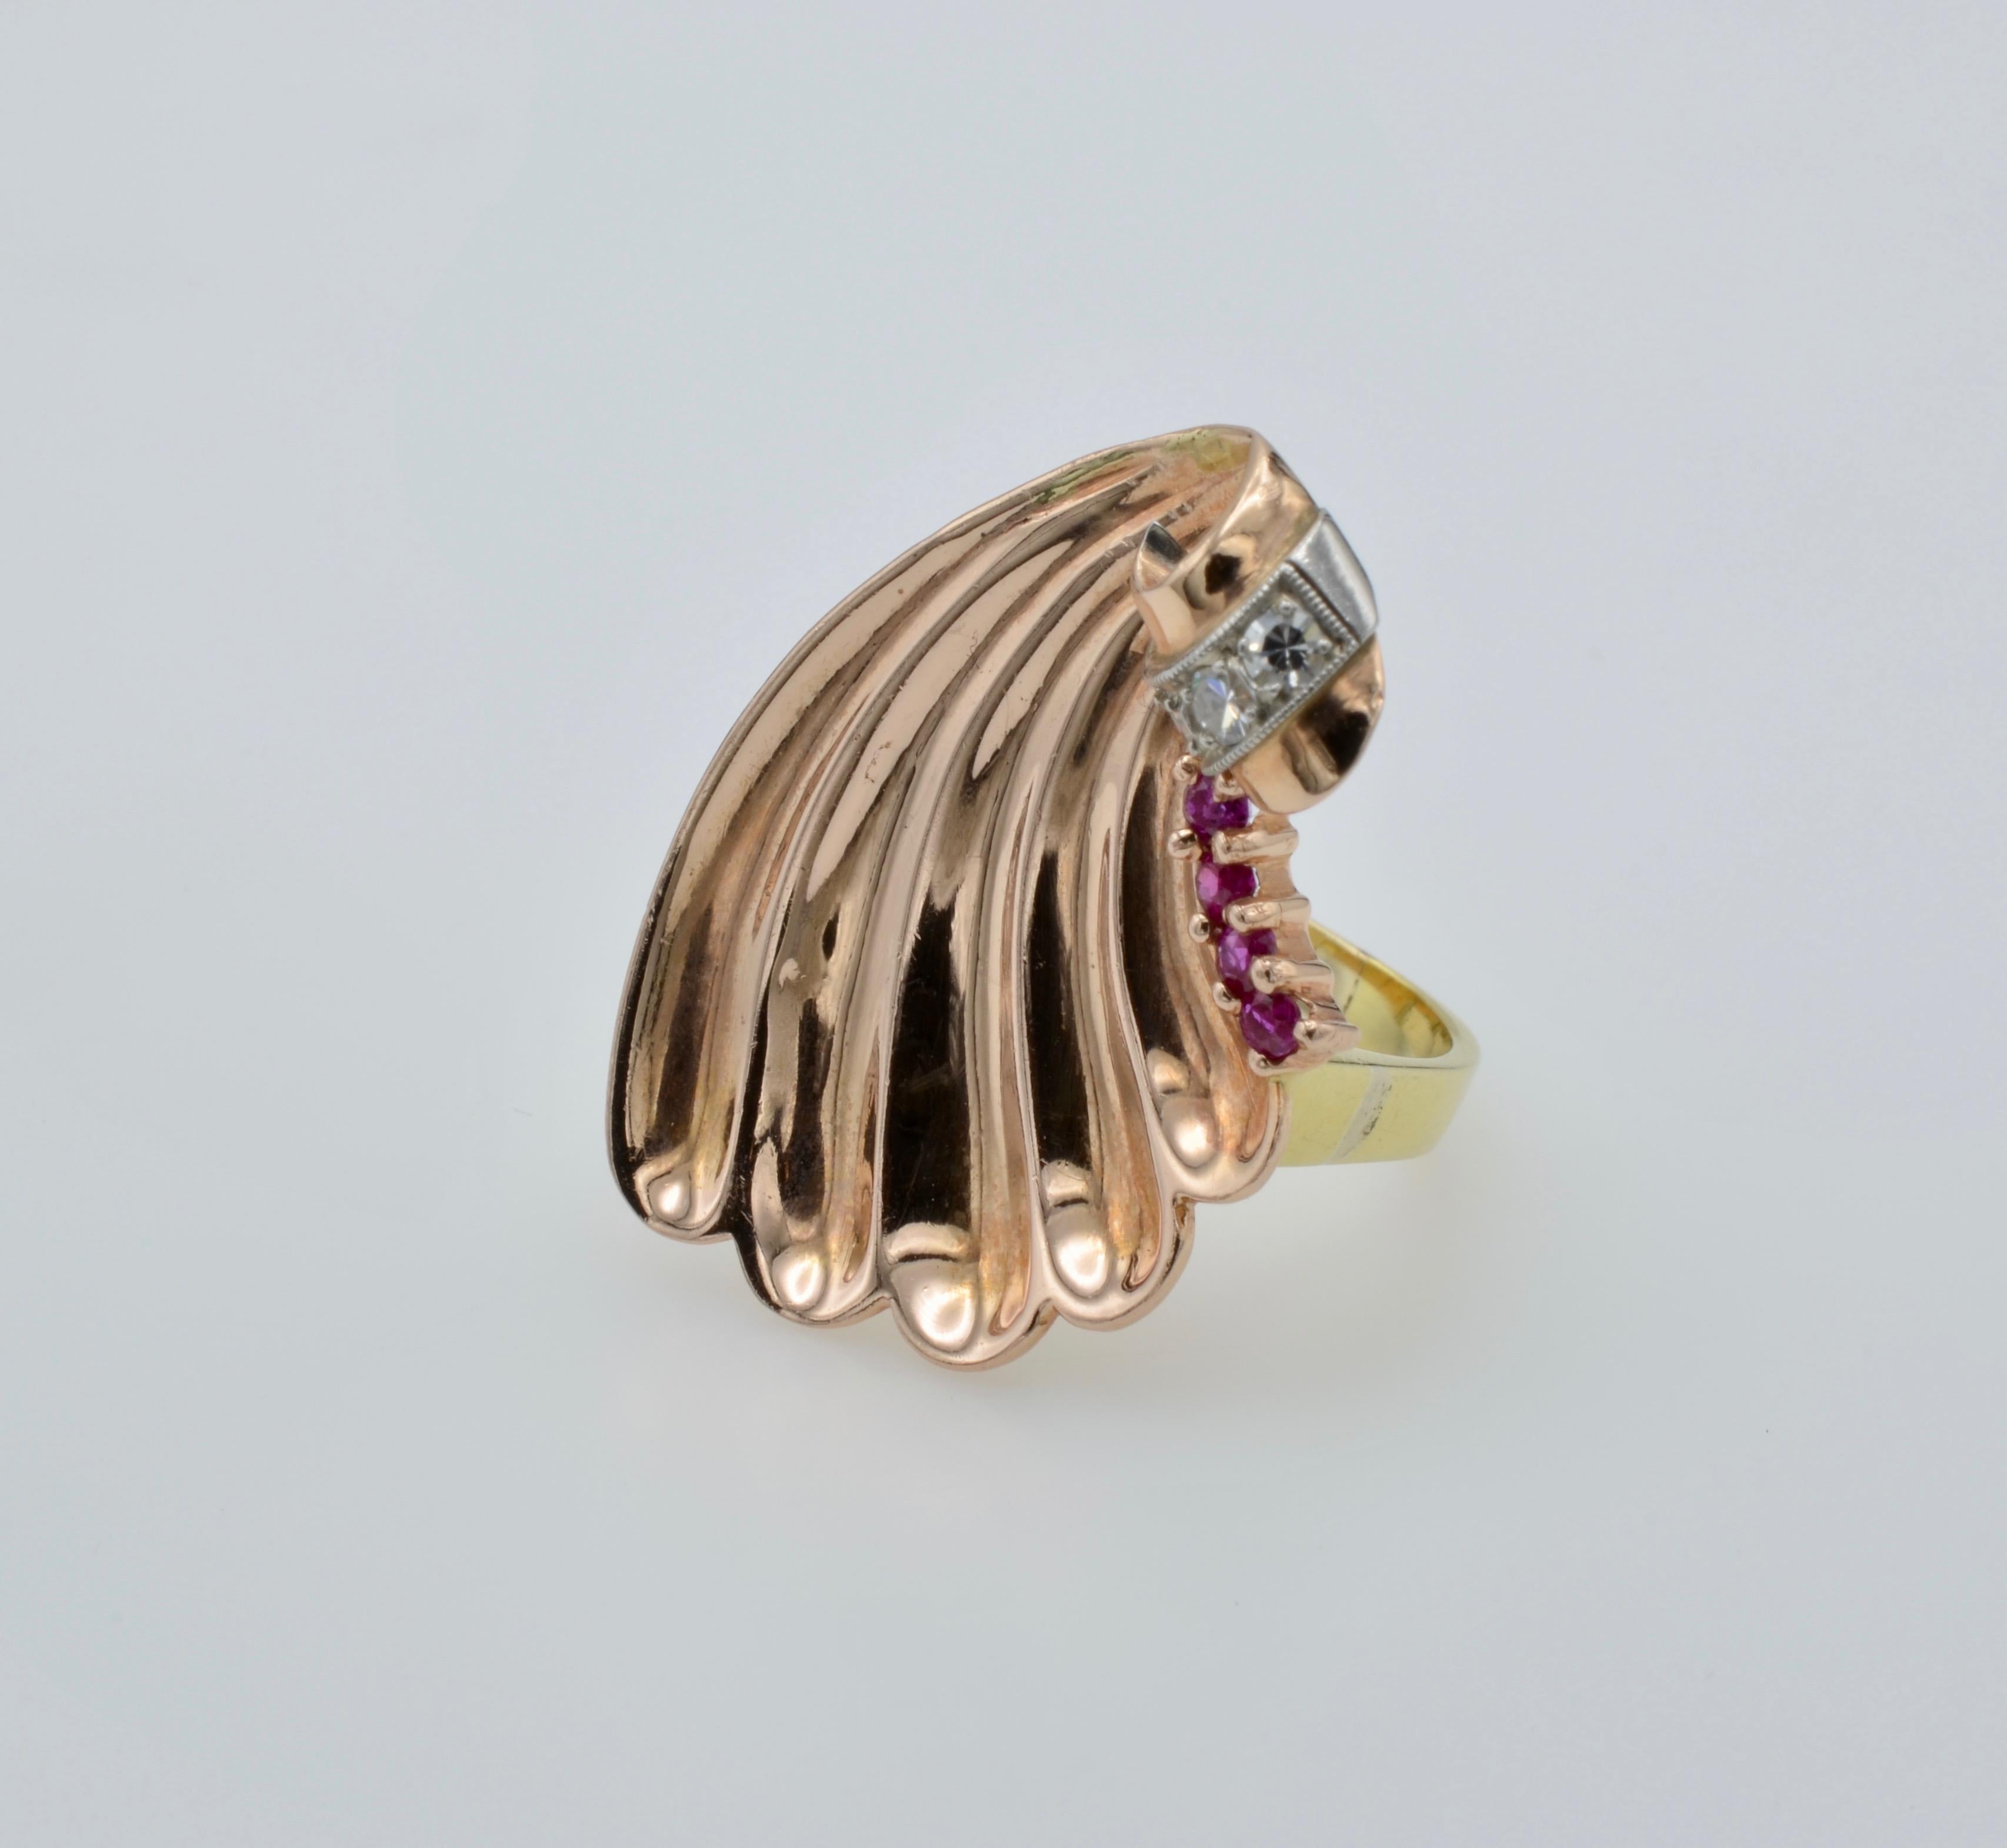 This Baroque Revival statement ring is a gorgeous flowing seashell adorned with rubies and diamonds. The seashell is a soft rose gold with elegant movement like waves on top of a yellow gold band. With feminine poise this ring looks as if Aphrodite